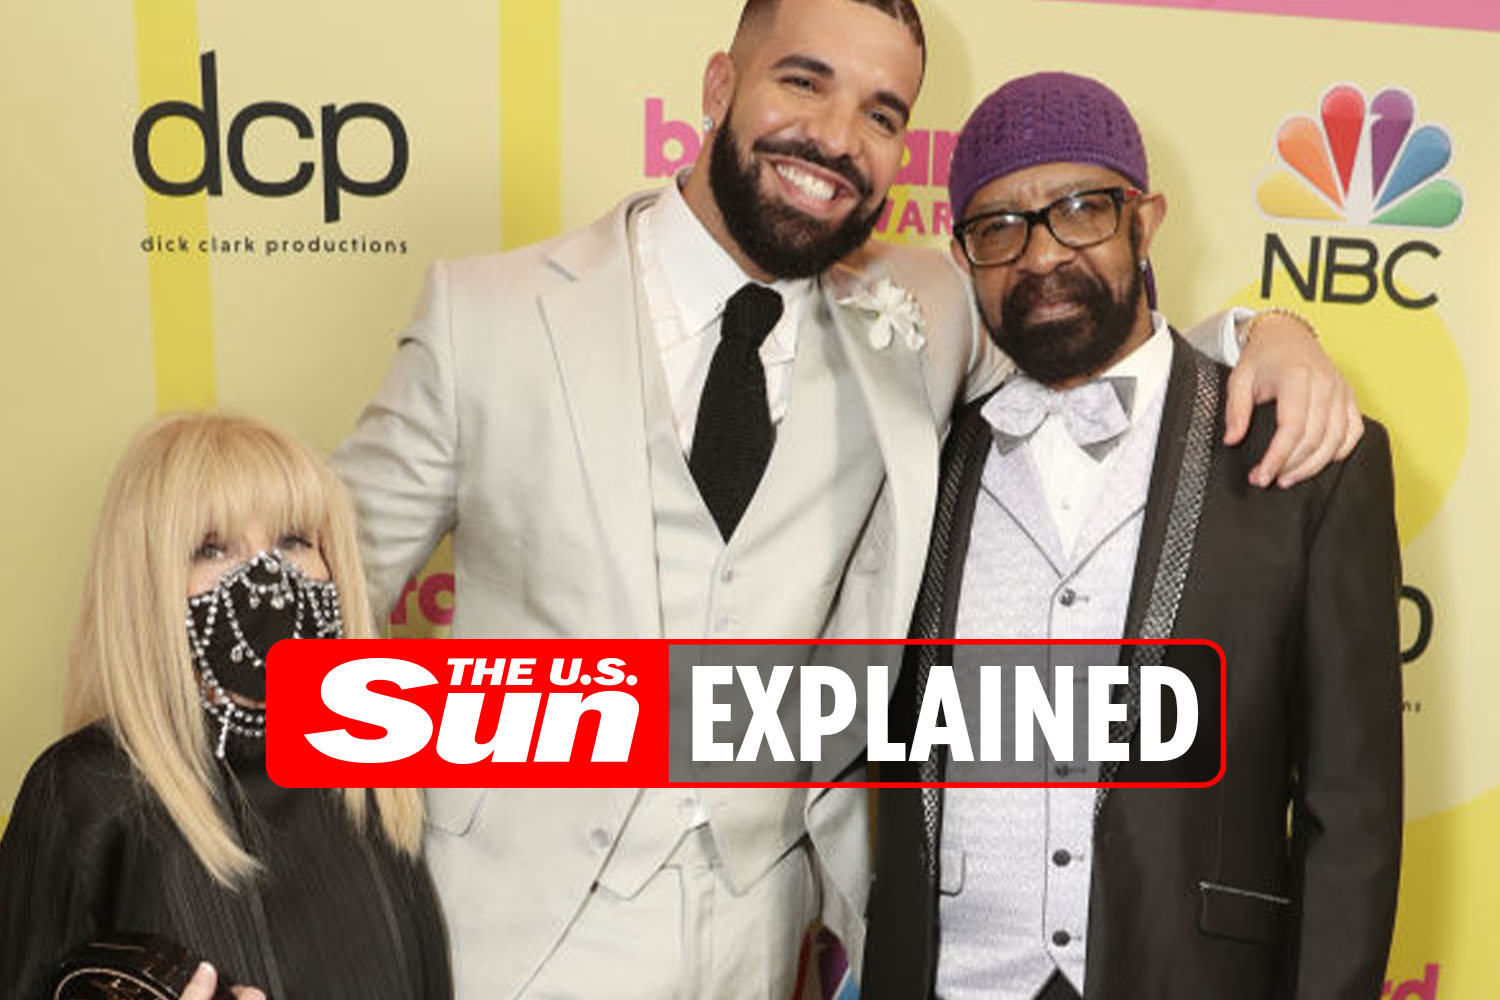 Who are Drake's parents? The US Sun